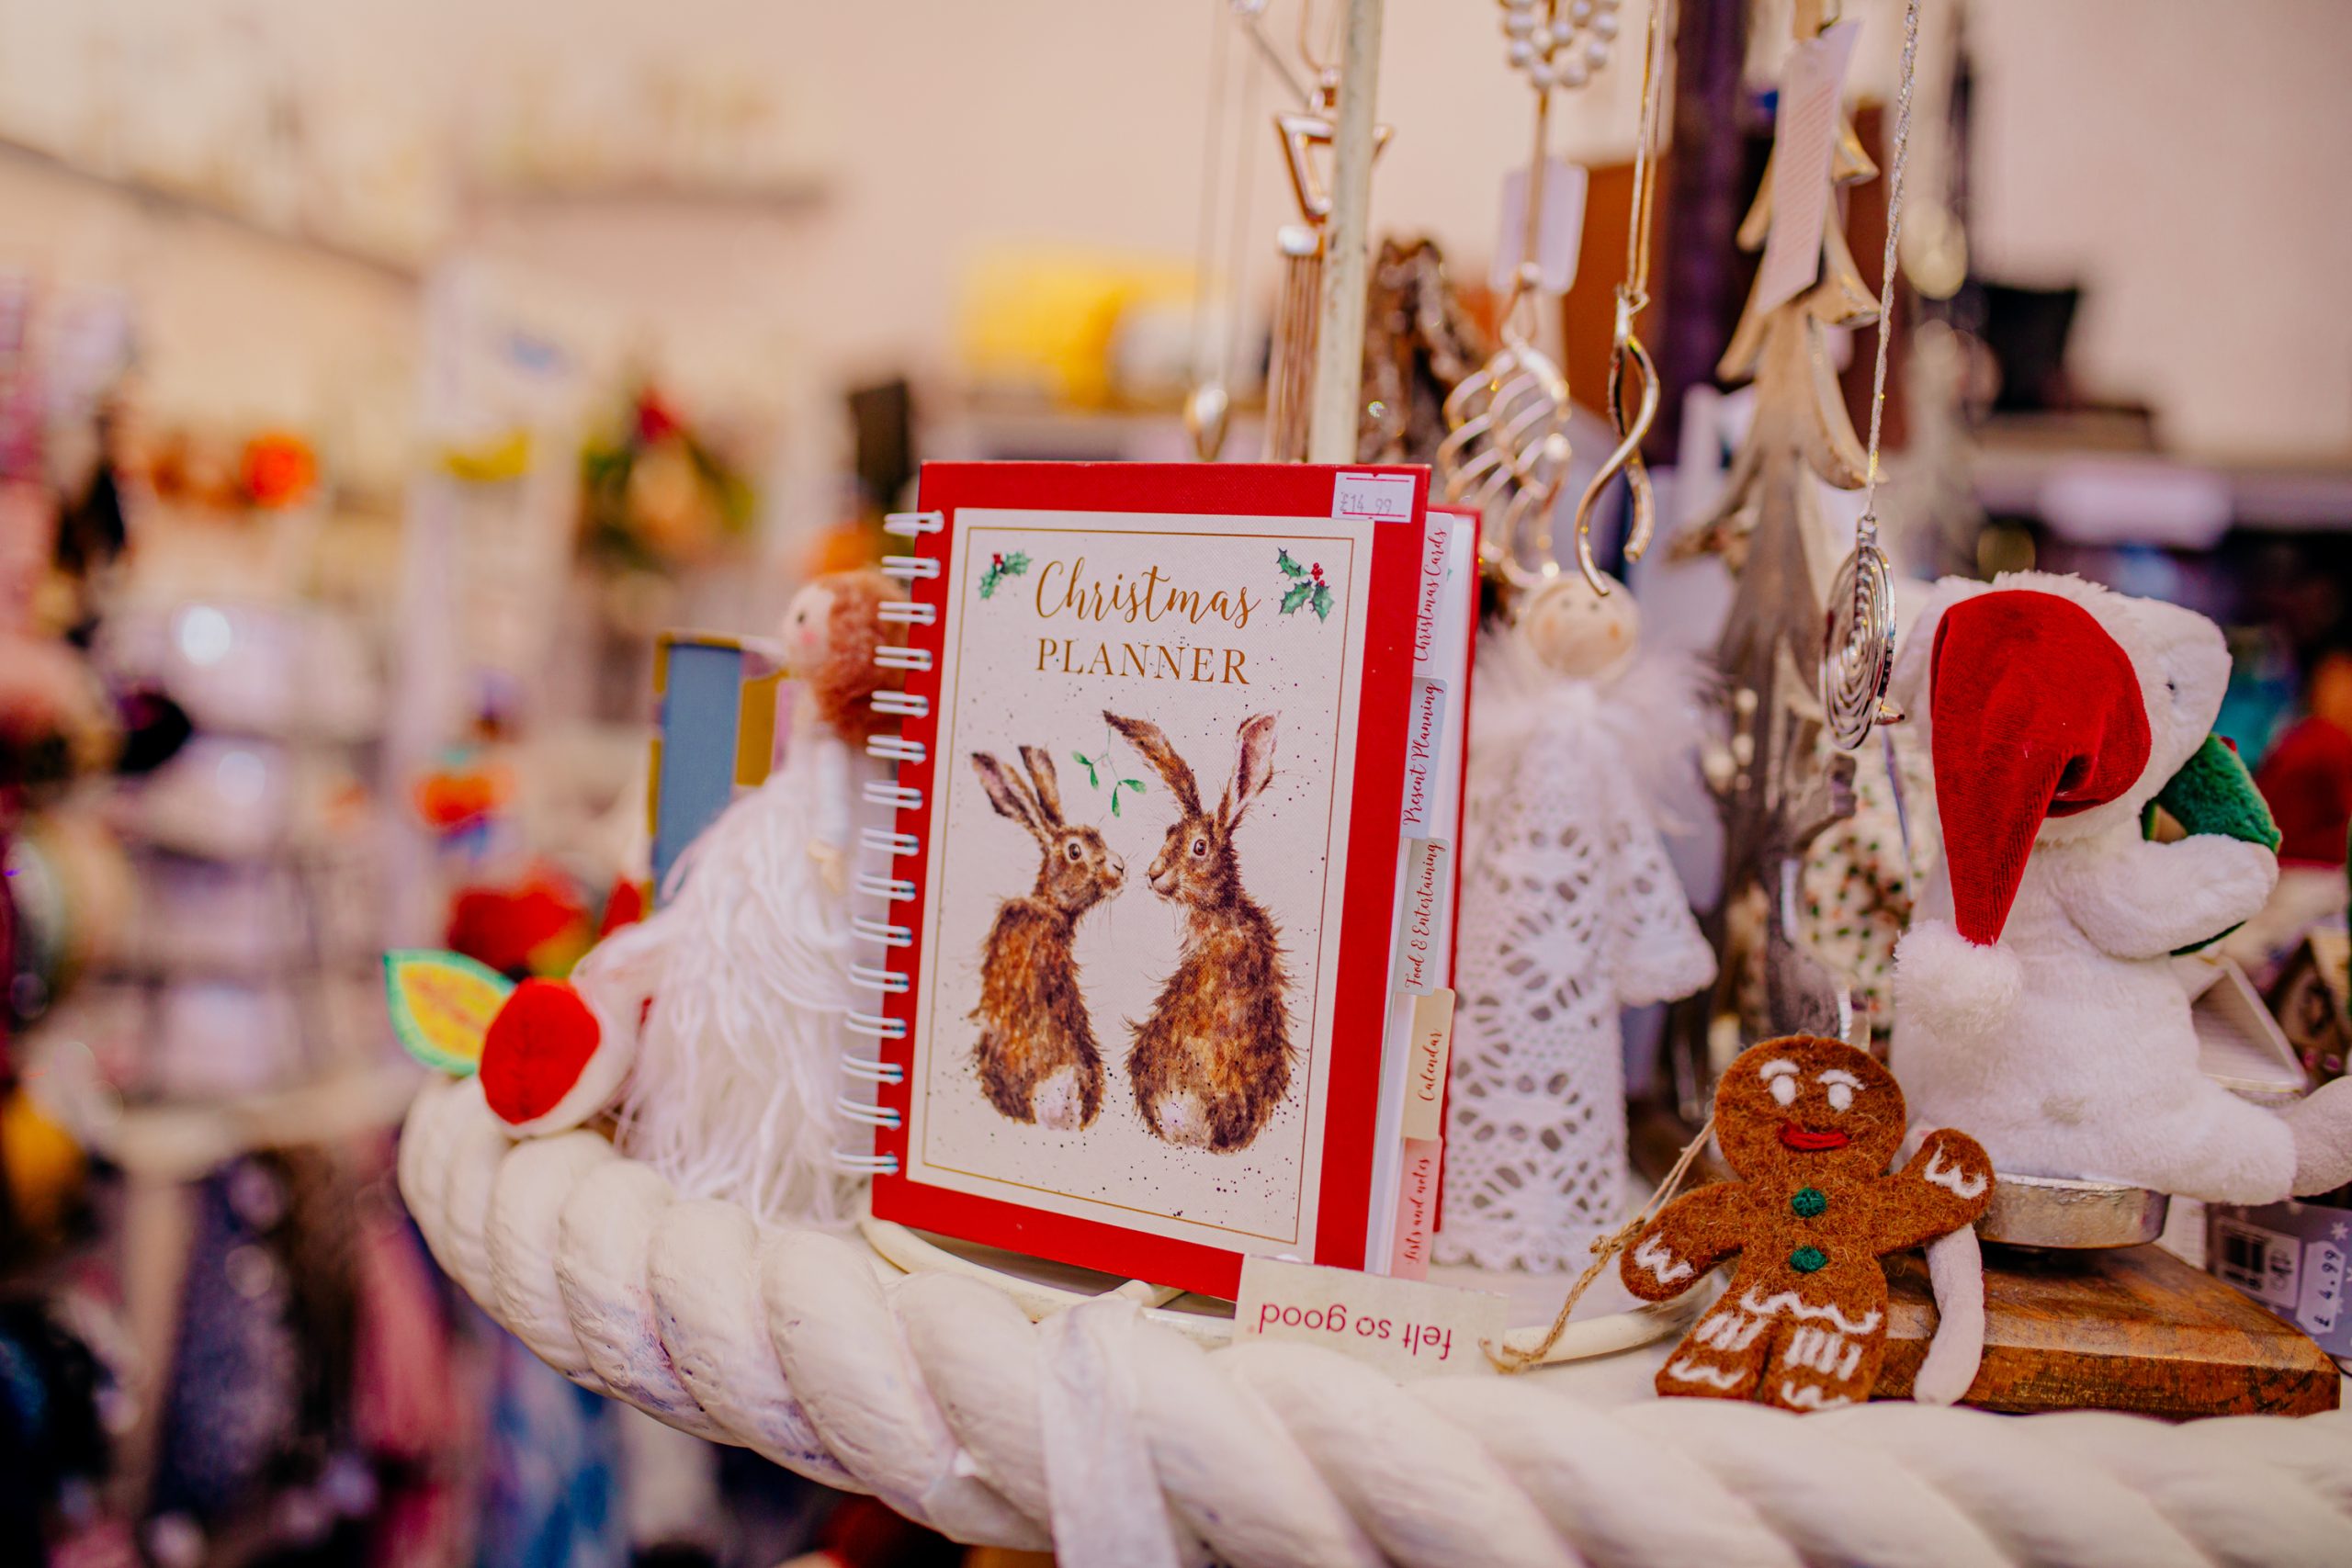 Snooks Gift Boutique, photo by Peter Flude